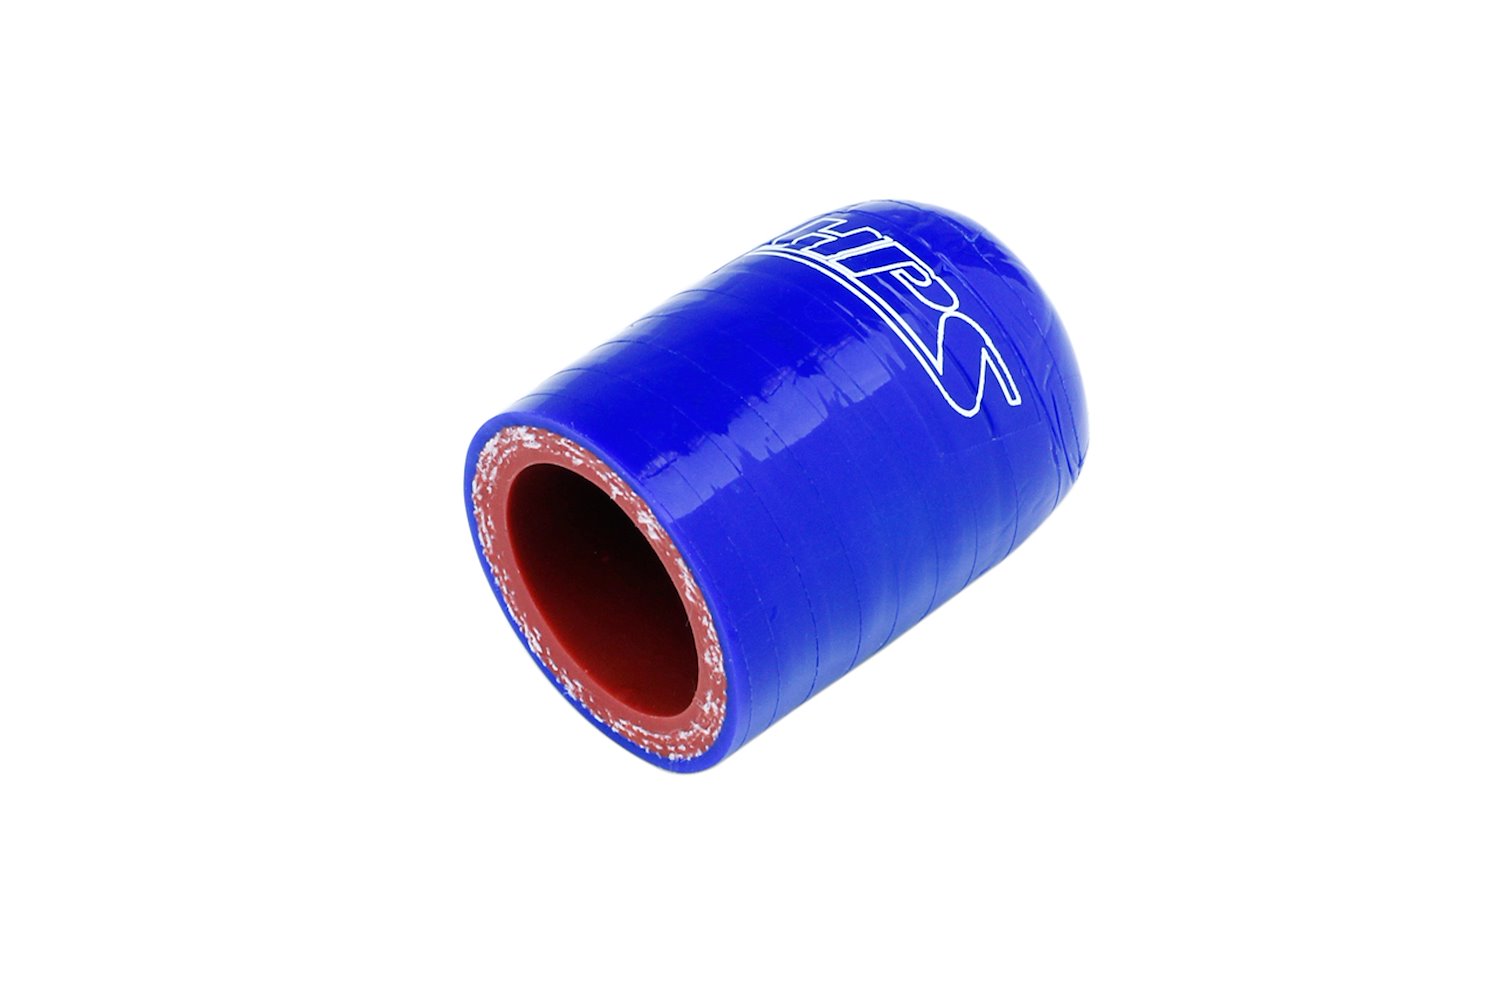 RSCC-038-BLUE Coolant Bypass Cap, 3-Ply Reinforced High-Temp. Silicone Bypass Cap, 3/8 in. ID, Blue